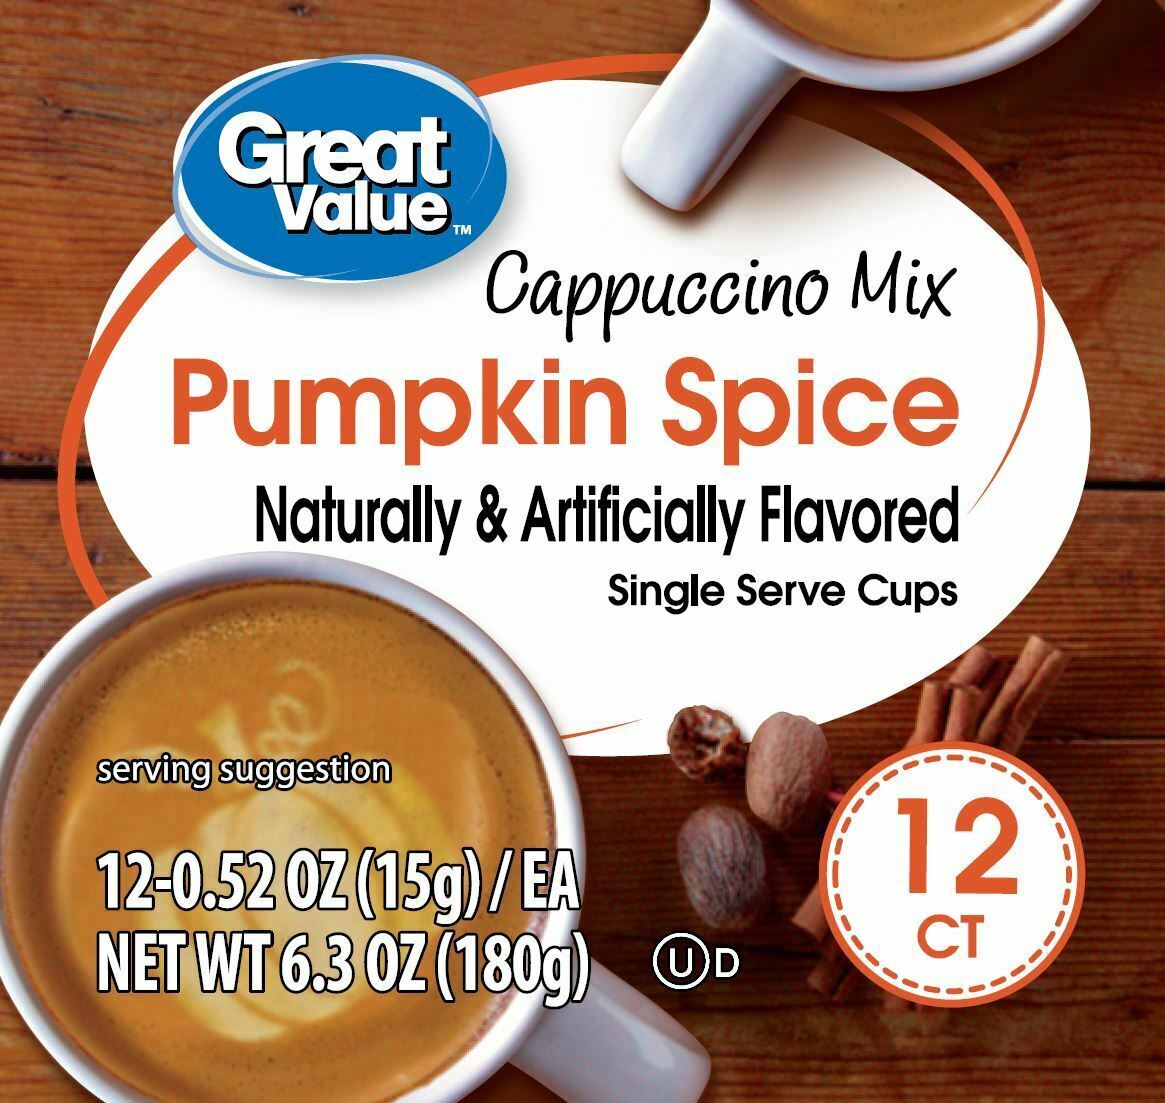 Pumpkin Spice Coffee Cappuccino Mix 12 Ct Coffee Pods/K-Cups - Great Value